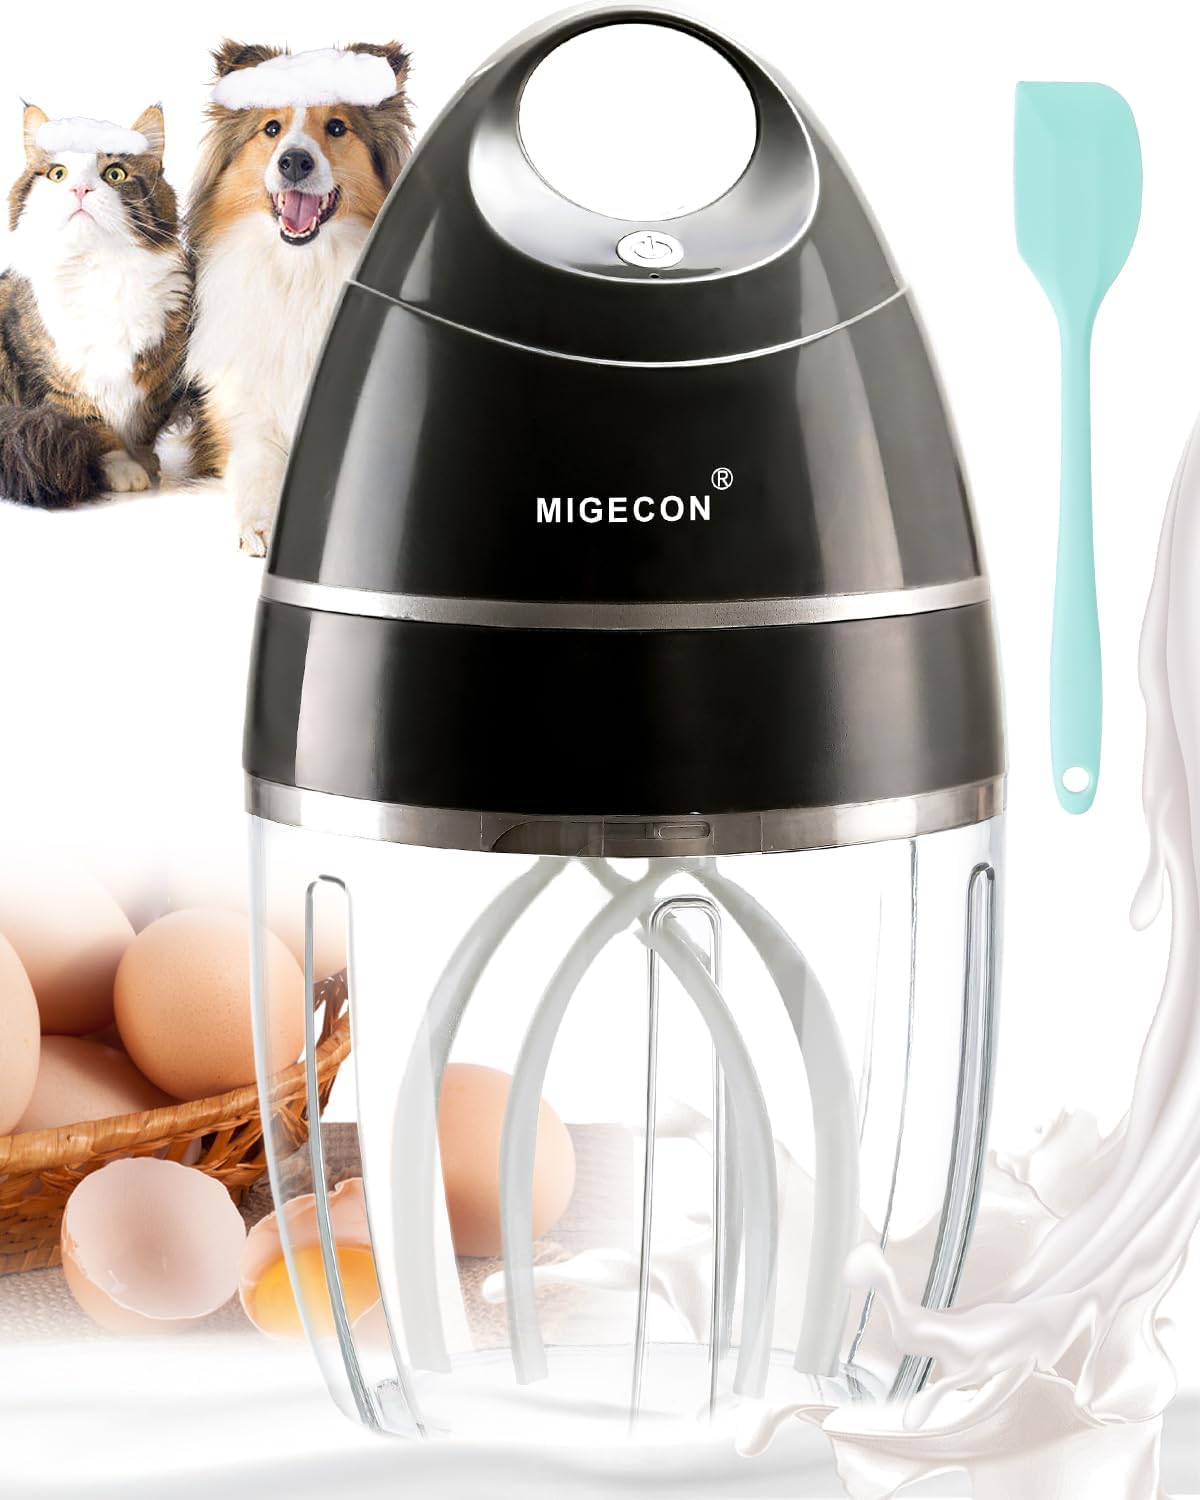 Stand Mixer - Egg Beaters Electric Portable Kitchen Mixer Cake Mixer, Milk Frother, Stand Shampoo Frother, Use with Egg, Hot Chocolate, Cream(Dark Grey) - Amazing Gadgets Outlet